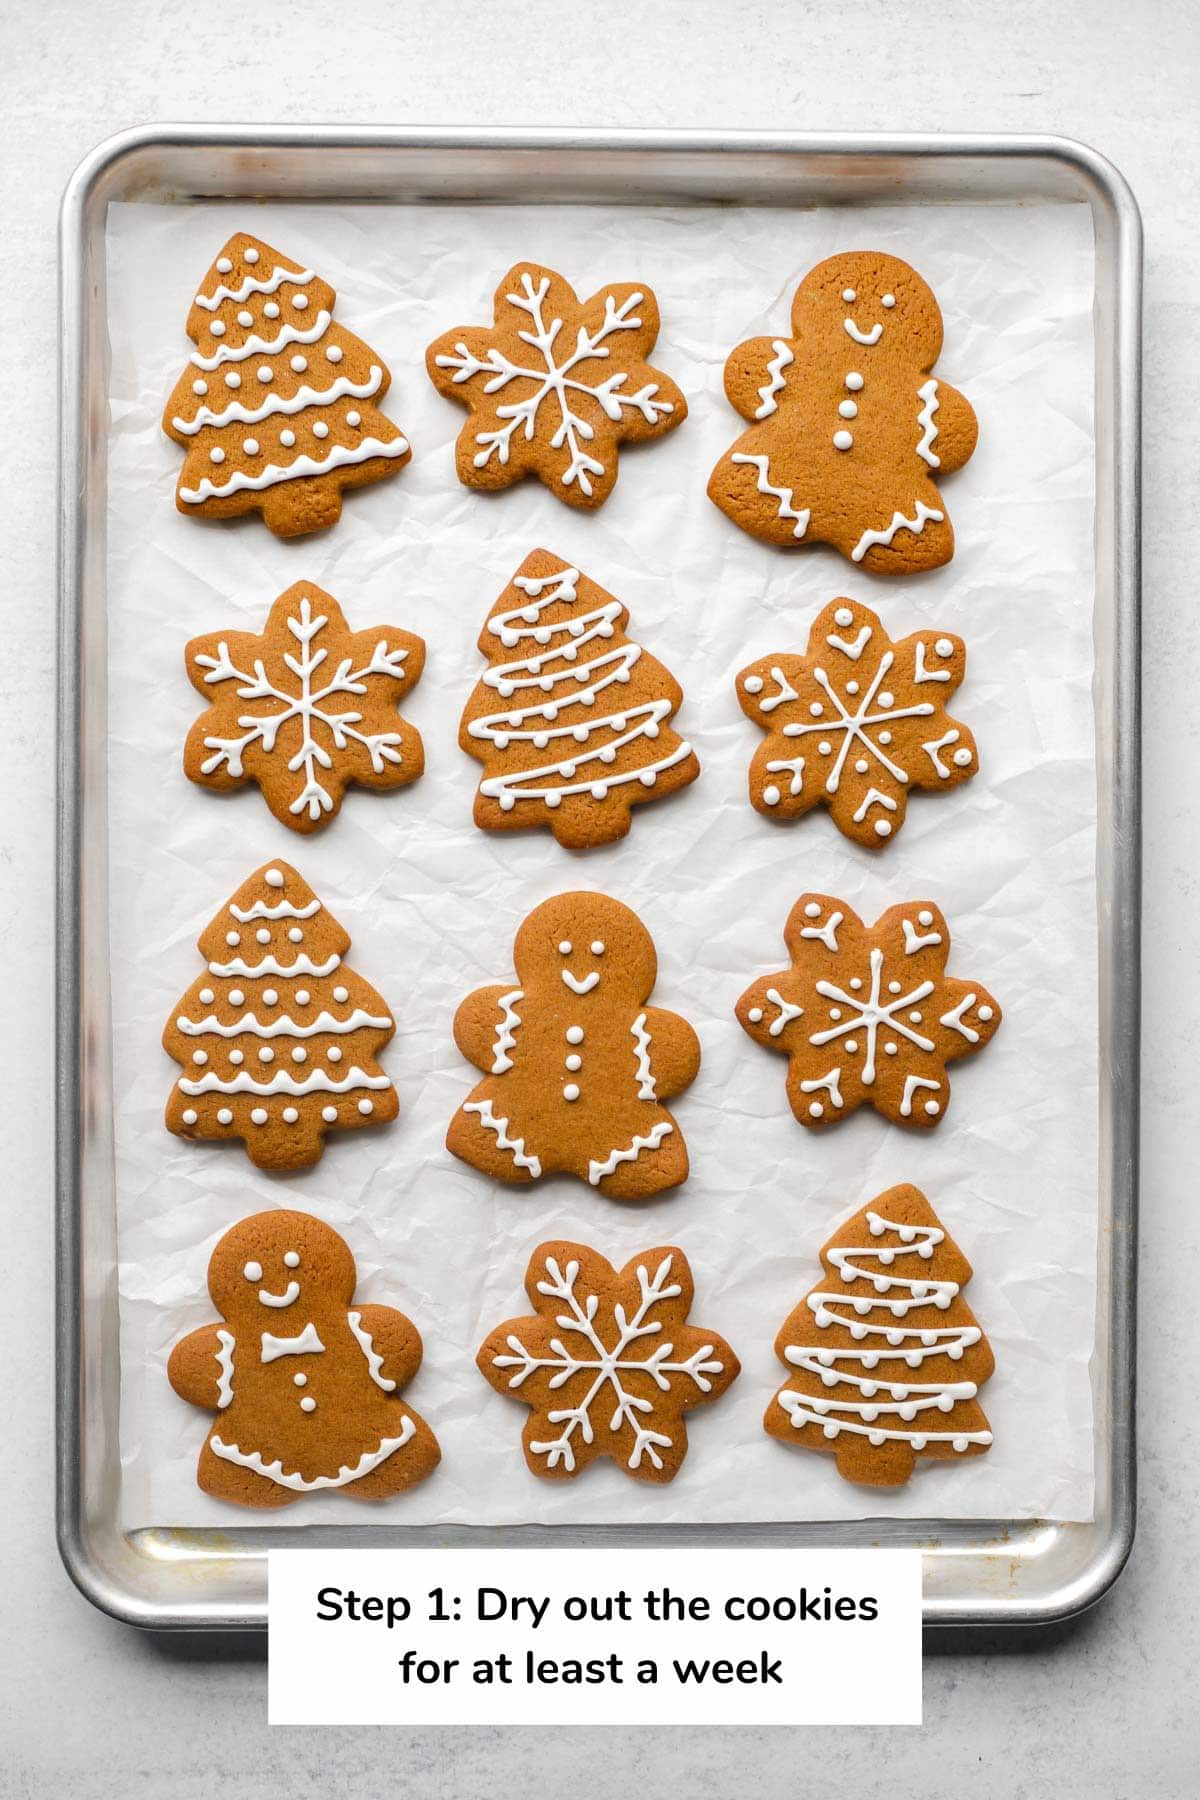 Sheet tray of gingerbread cookies that reads 'Step 1: Dry out the cookies for at least a week'